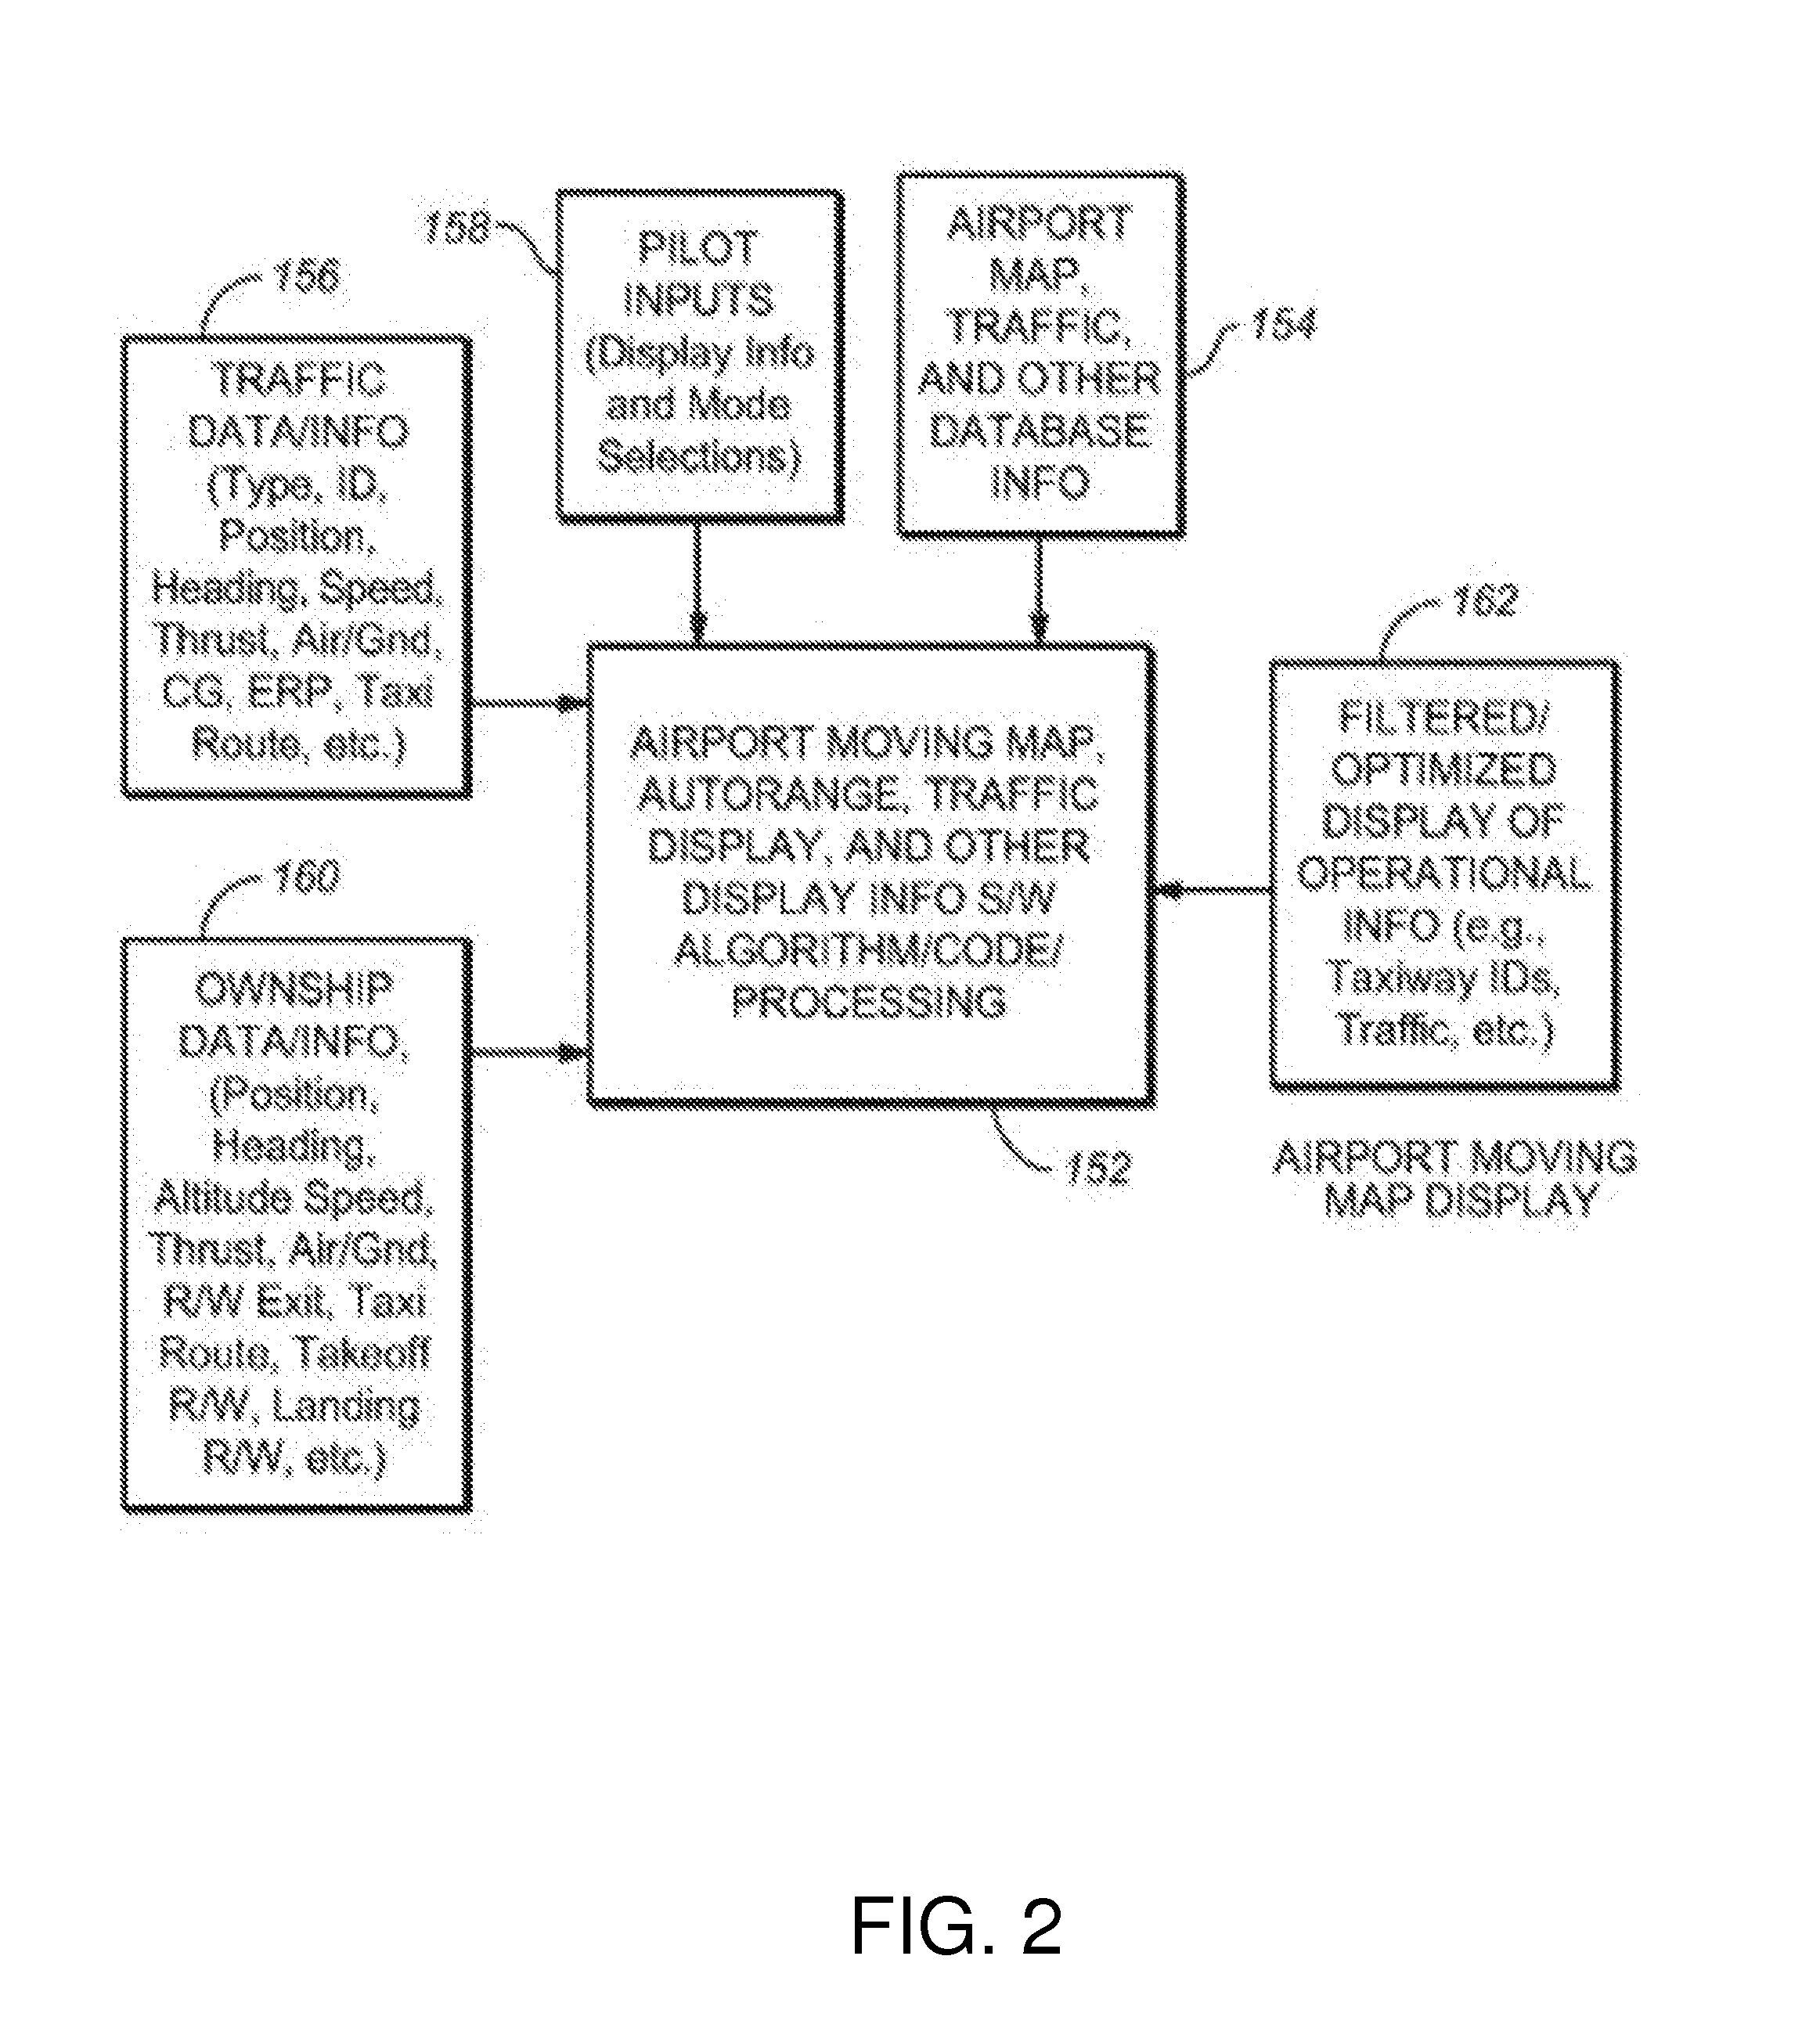 Methods and Systems for Filtering Traffic Information for Display